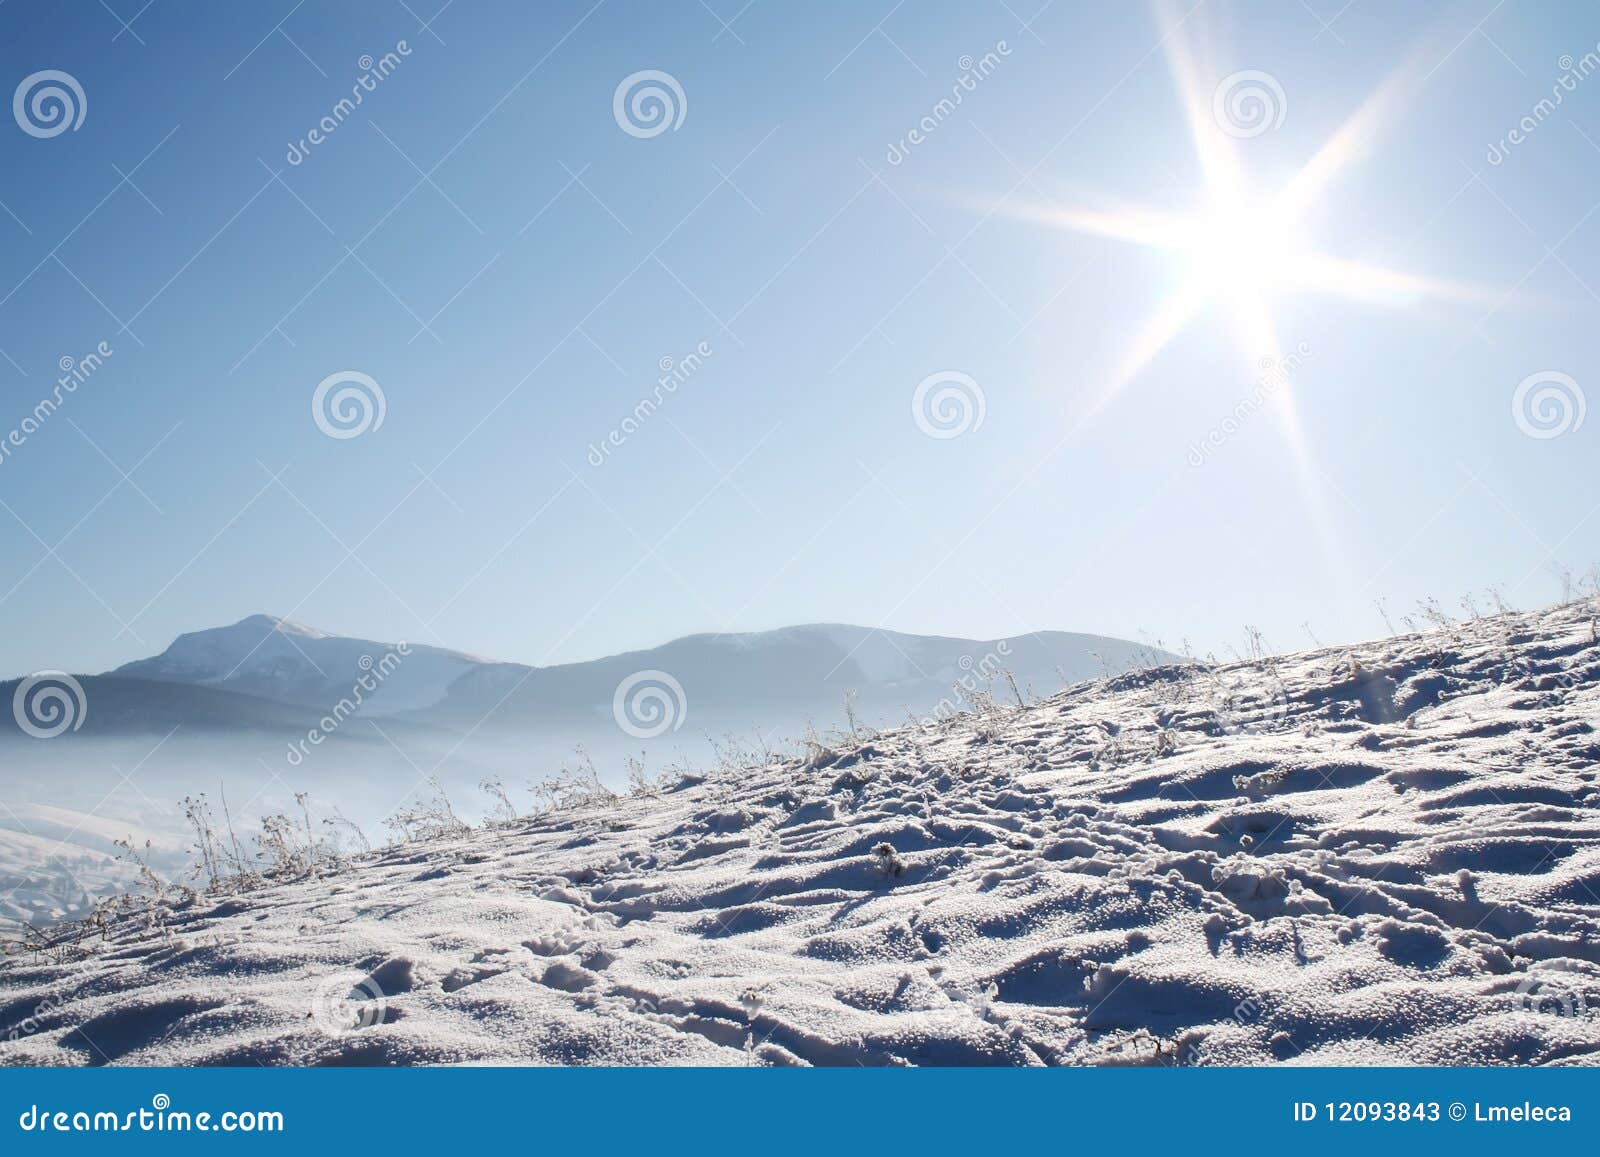 Snow Covered Mountains Under Blue Sky Stock Image Image Of Snow